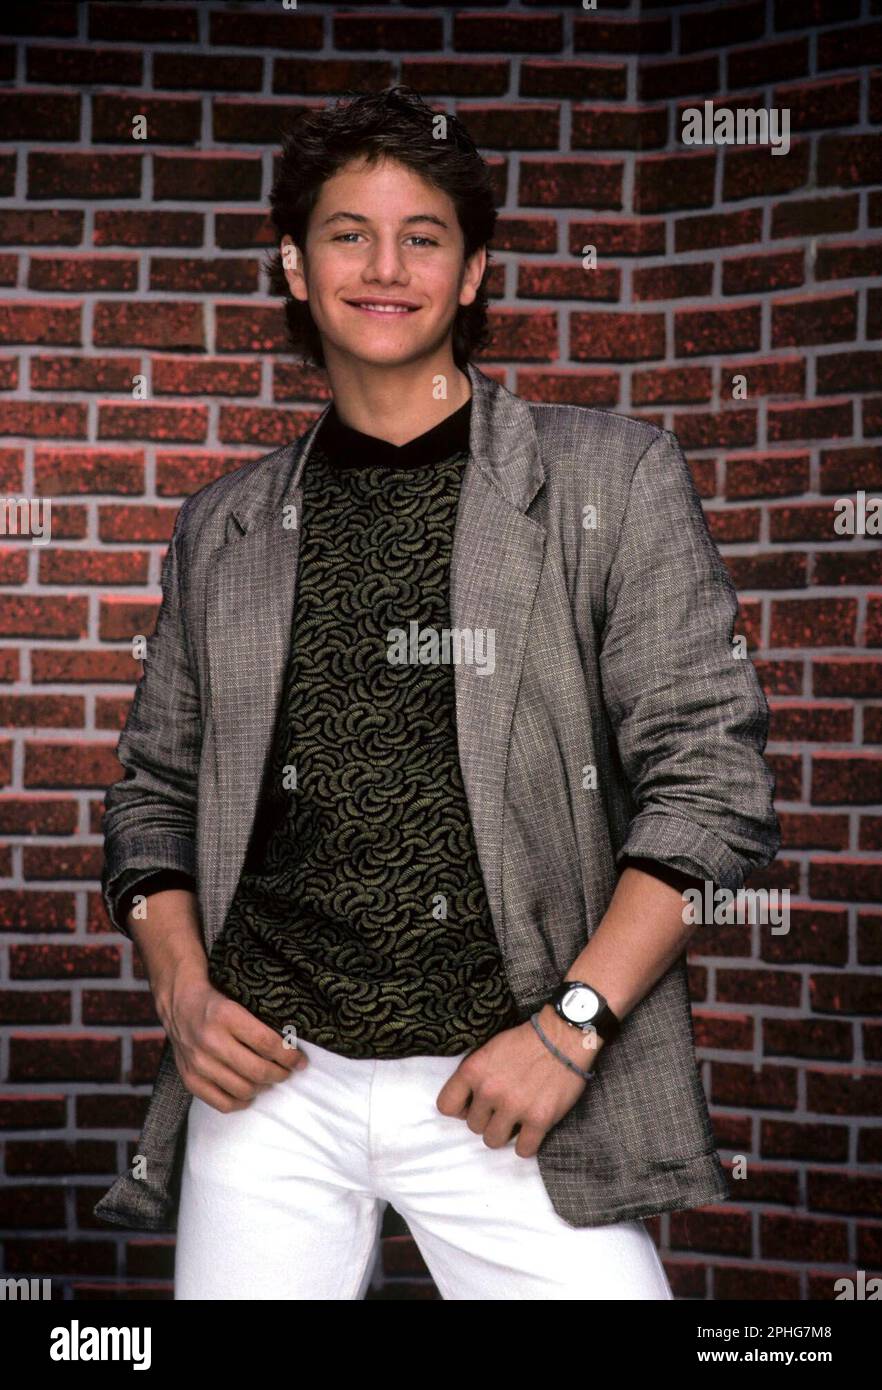 KIRK CAMERON in GROWING PAINS (1985), directed by JOHN TRACY. Credit: WARNER BROS. TELEVISION / Album Stock Photo